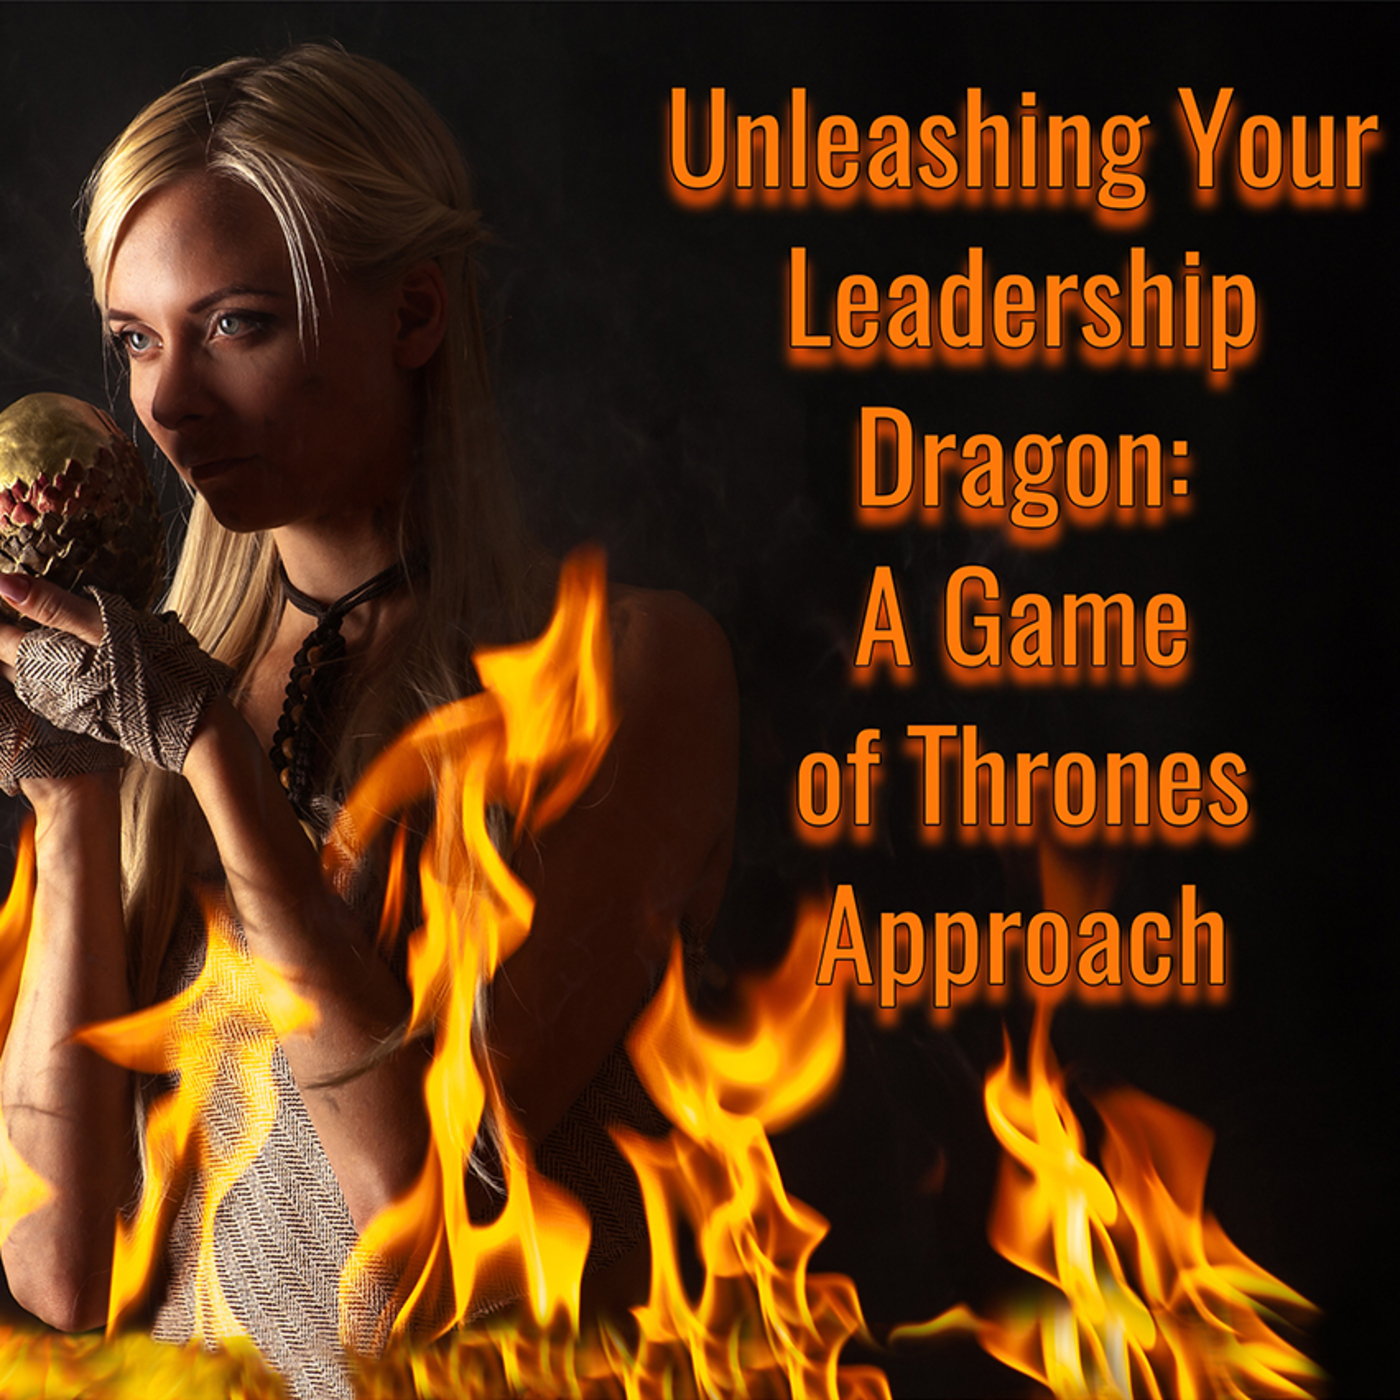 Unleashing Your Leadership Dragon: A Game of Thrones Approach